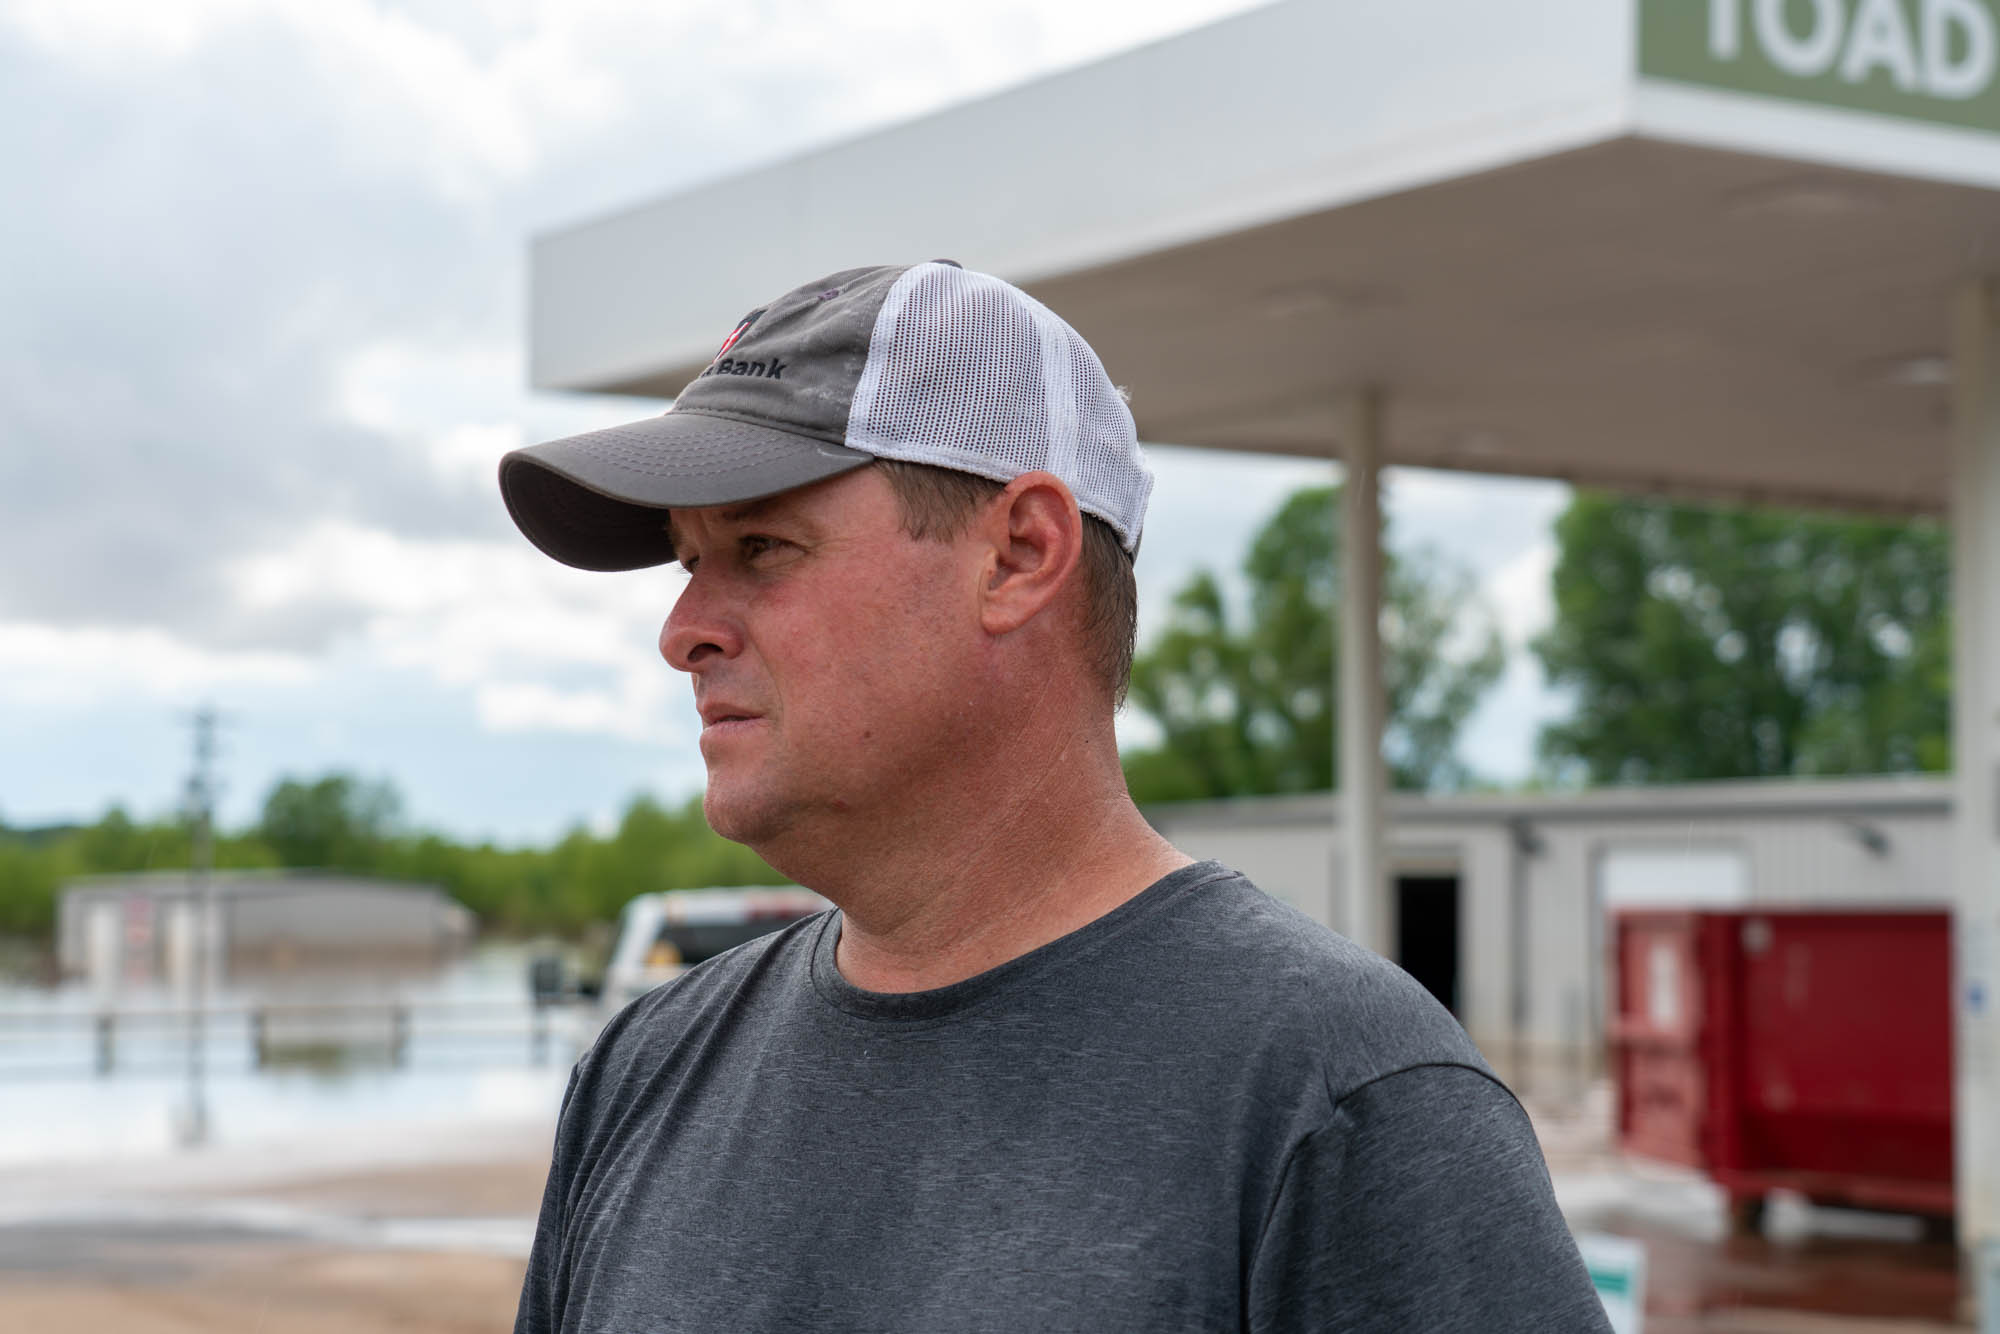 Jason Trantina has operated the Toad Suck One-Stop since 1997. The parking lot had taken on water before, but this was the first time the store itself flooded. (Jordan Laird/News21)